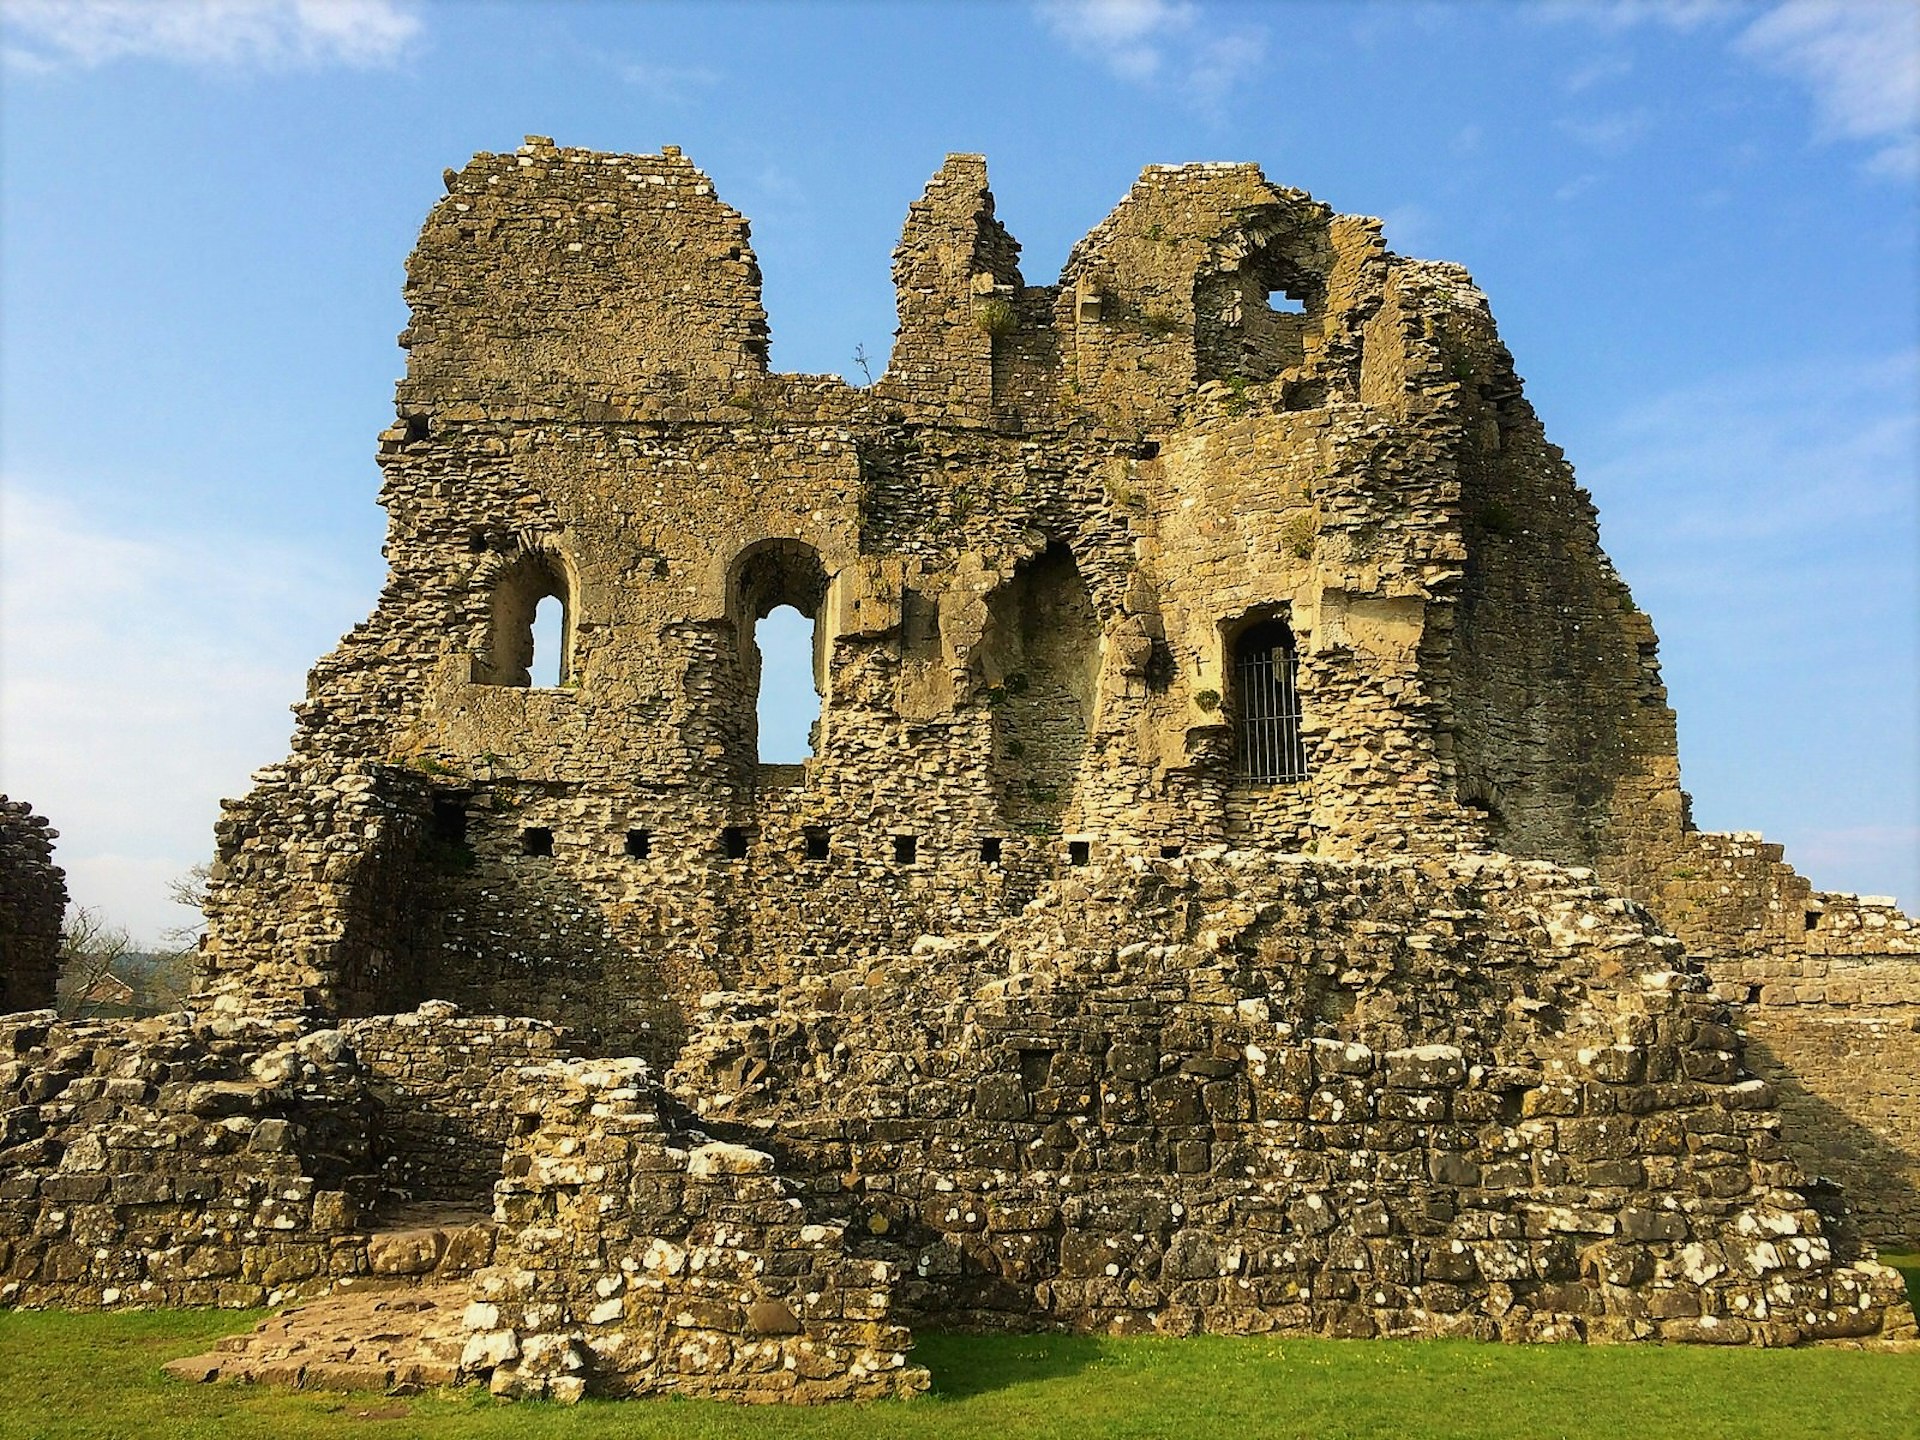 Cardiff day trip - The ruins of Ogmore Castle in south Wales are Grade I listed ruins, rumoured to be haunted © Clifton Wilkinson / Lonely Planet